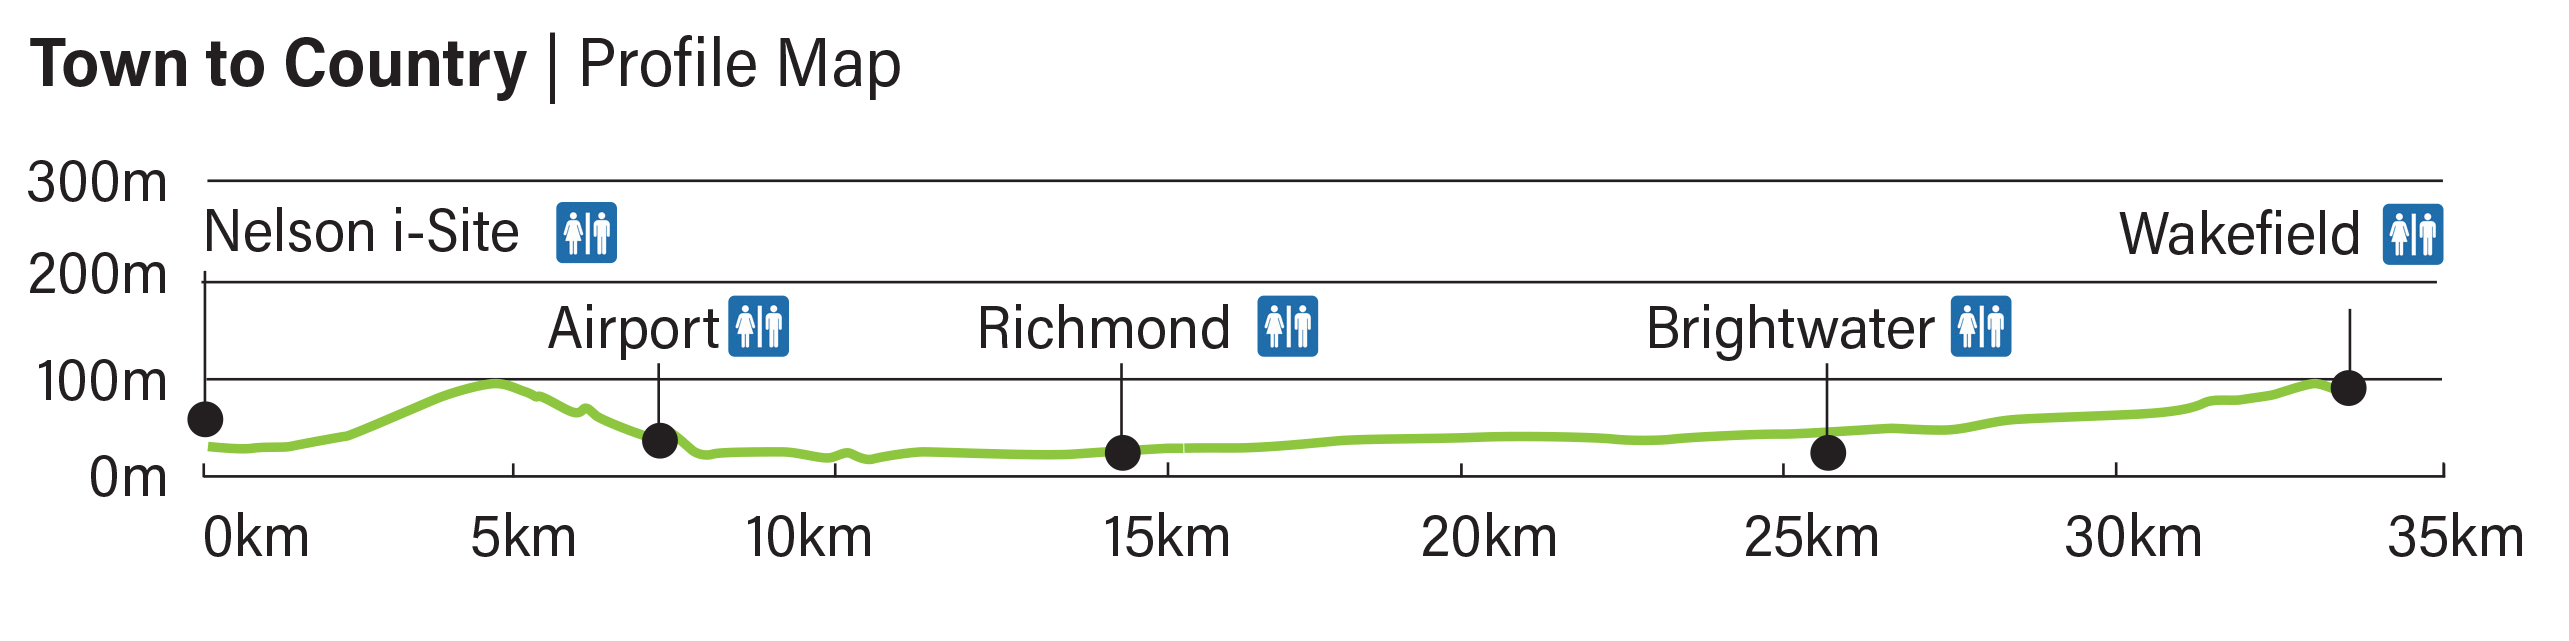 Town and Country: Nelson CBD | Airport | Richmond | Brightwater | Wakefield Profile Map